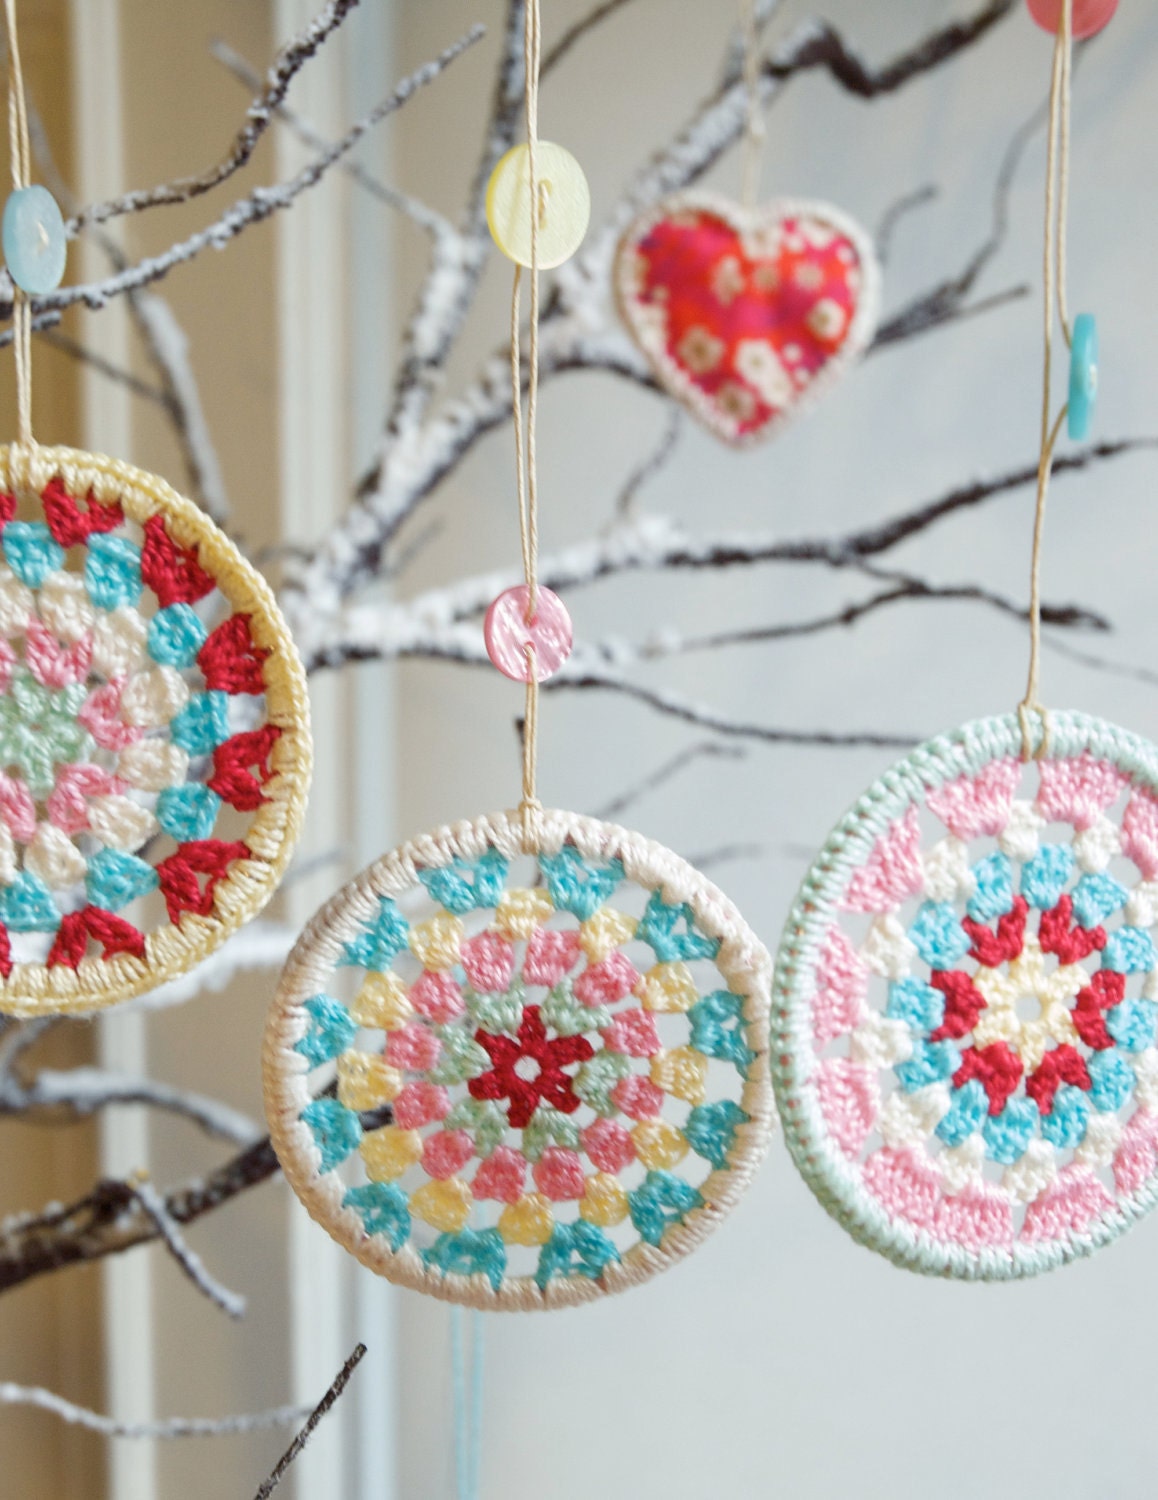 Three Crocheted Granny Circle Decorations - Crocheted Decorations